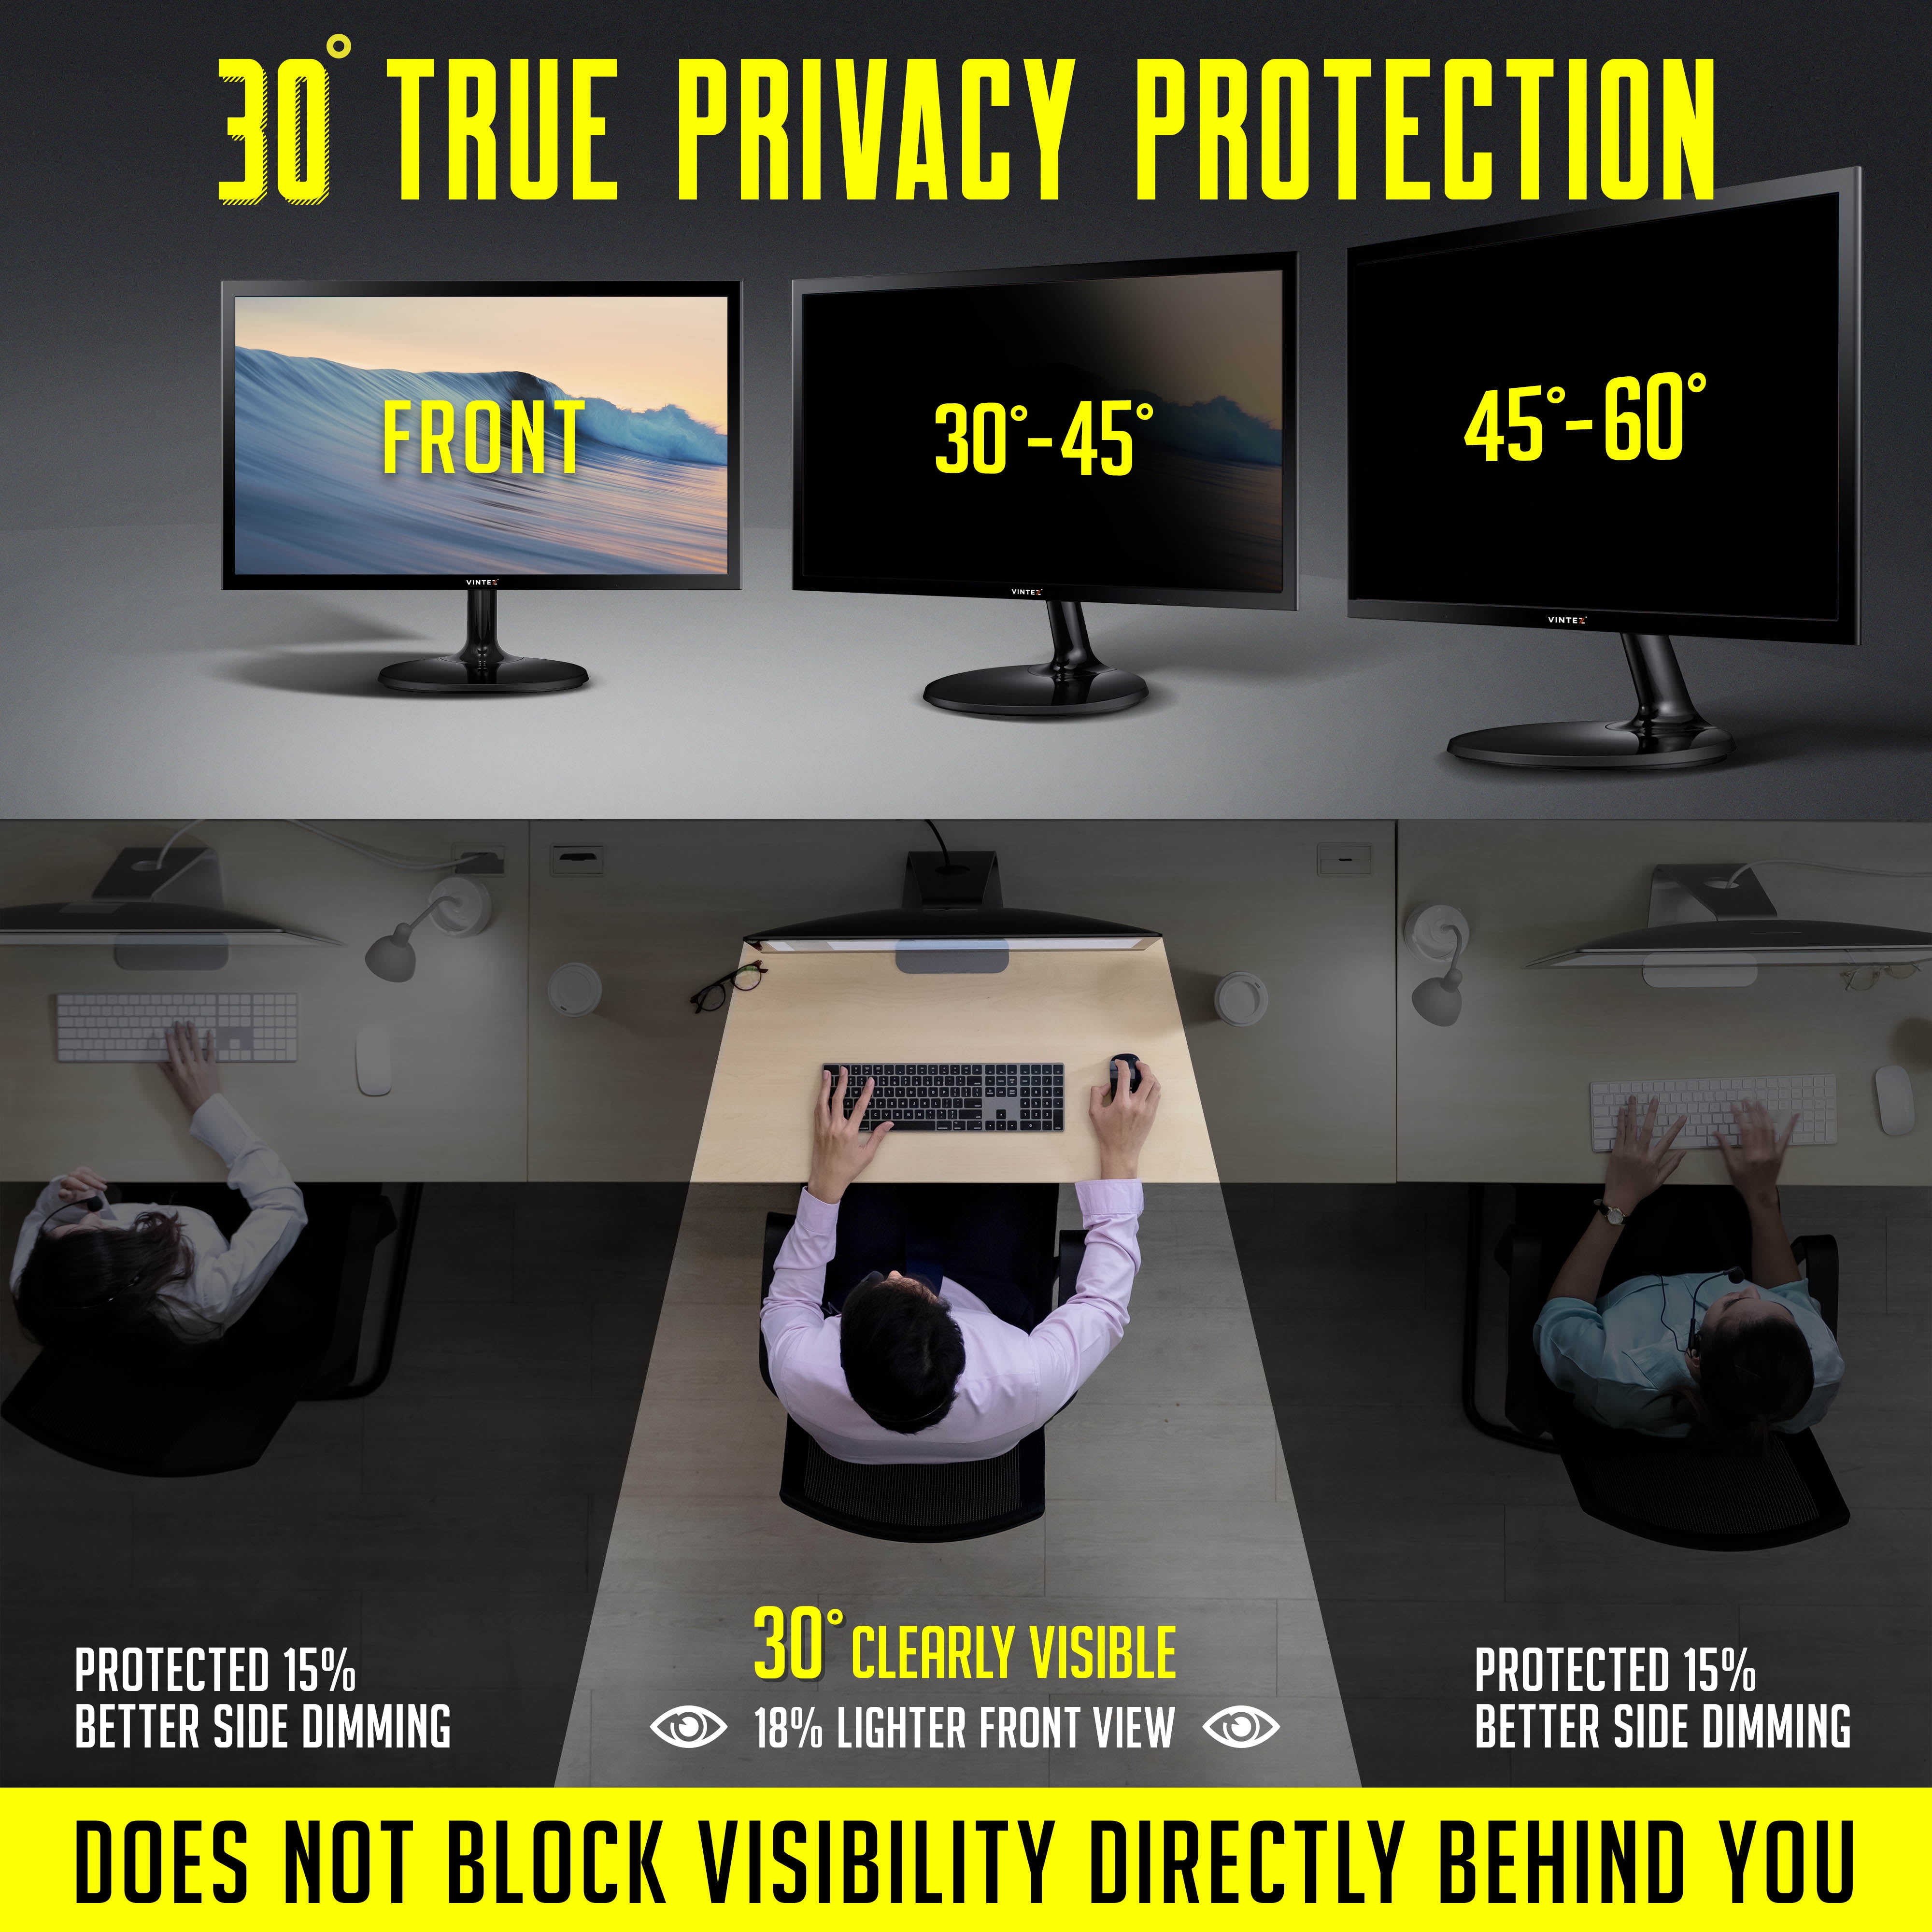 24 Inch Privacy Screen Filter for Widescreen Monitor Please Measure Carefully! 16:9 Aspect ratio 